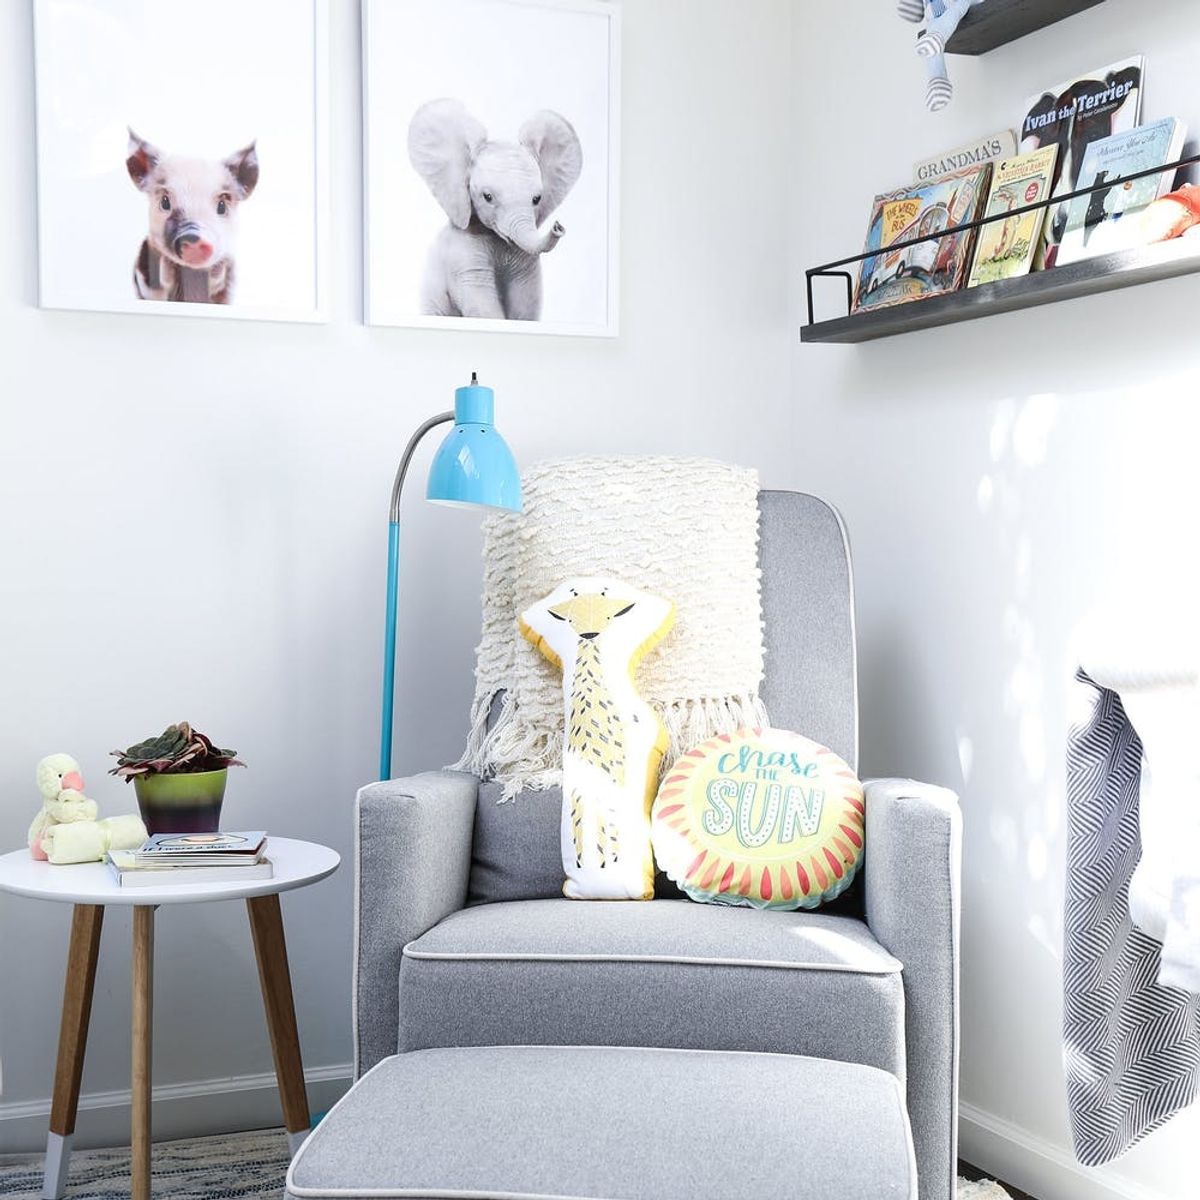 You’ll Never Believe Which Tiny Room This Mom-to-Be Turned Into a Nursery